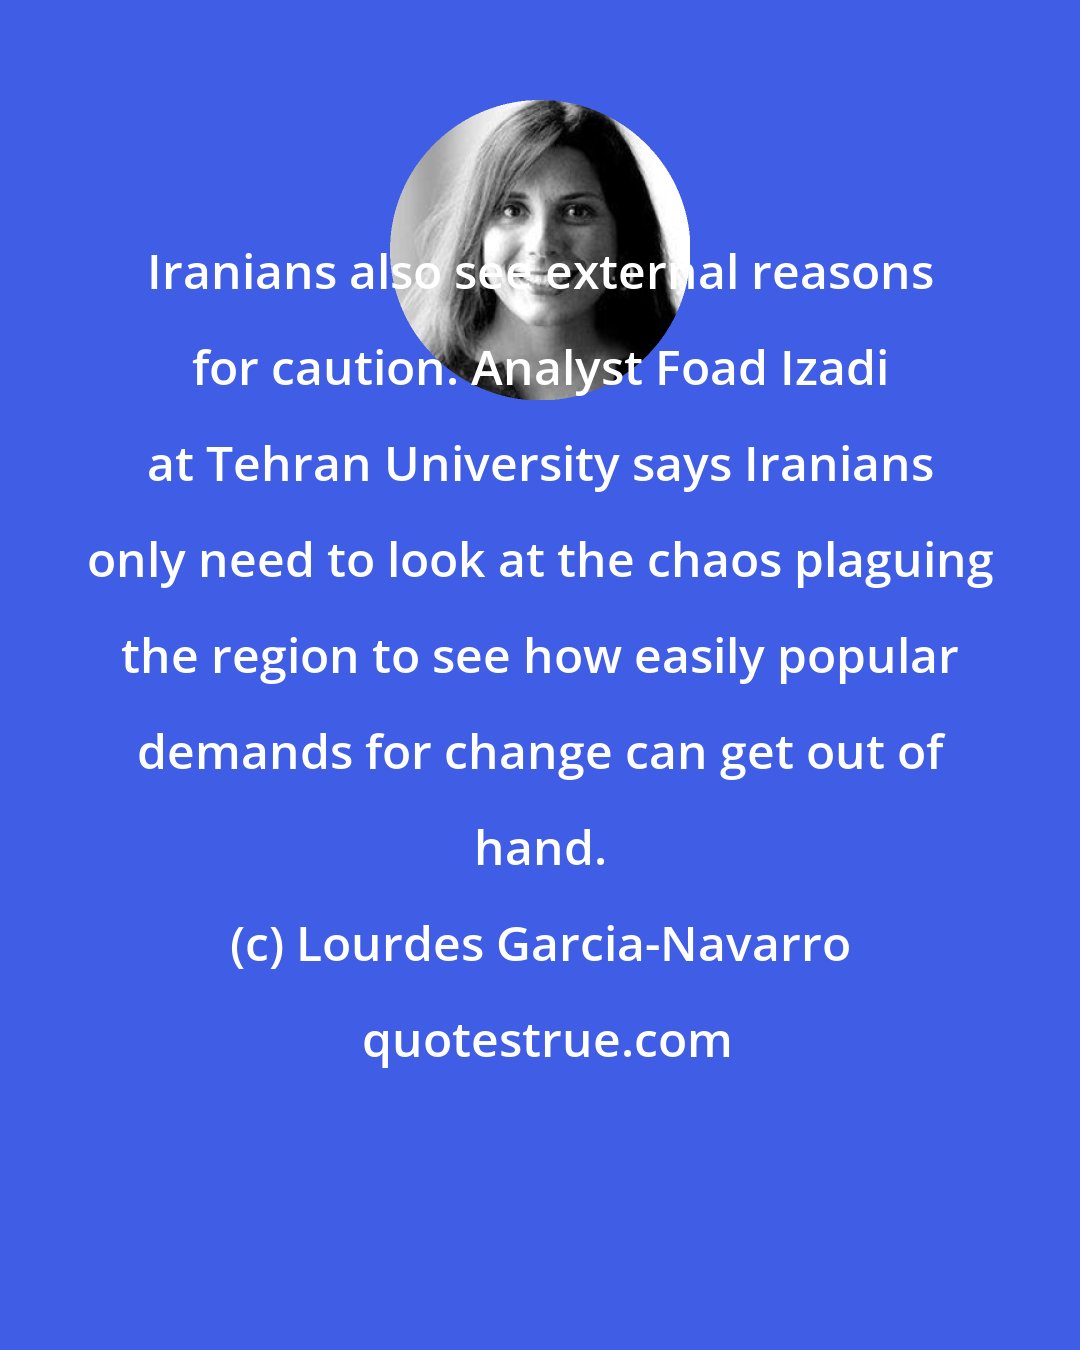 Lourdes Garcia-Navarro: Iranians also see external reasons for caution. Analyst Foad Izadi at Tehran University says Iranians only need to look at the chaos plaguing the region to see how easily popular demands for change can get out of hand.